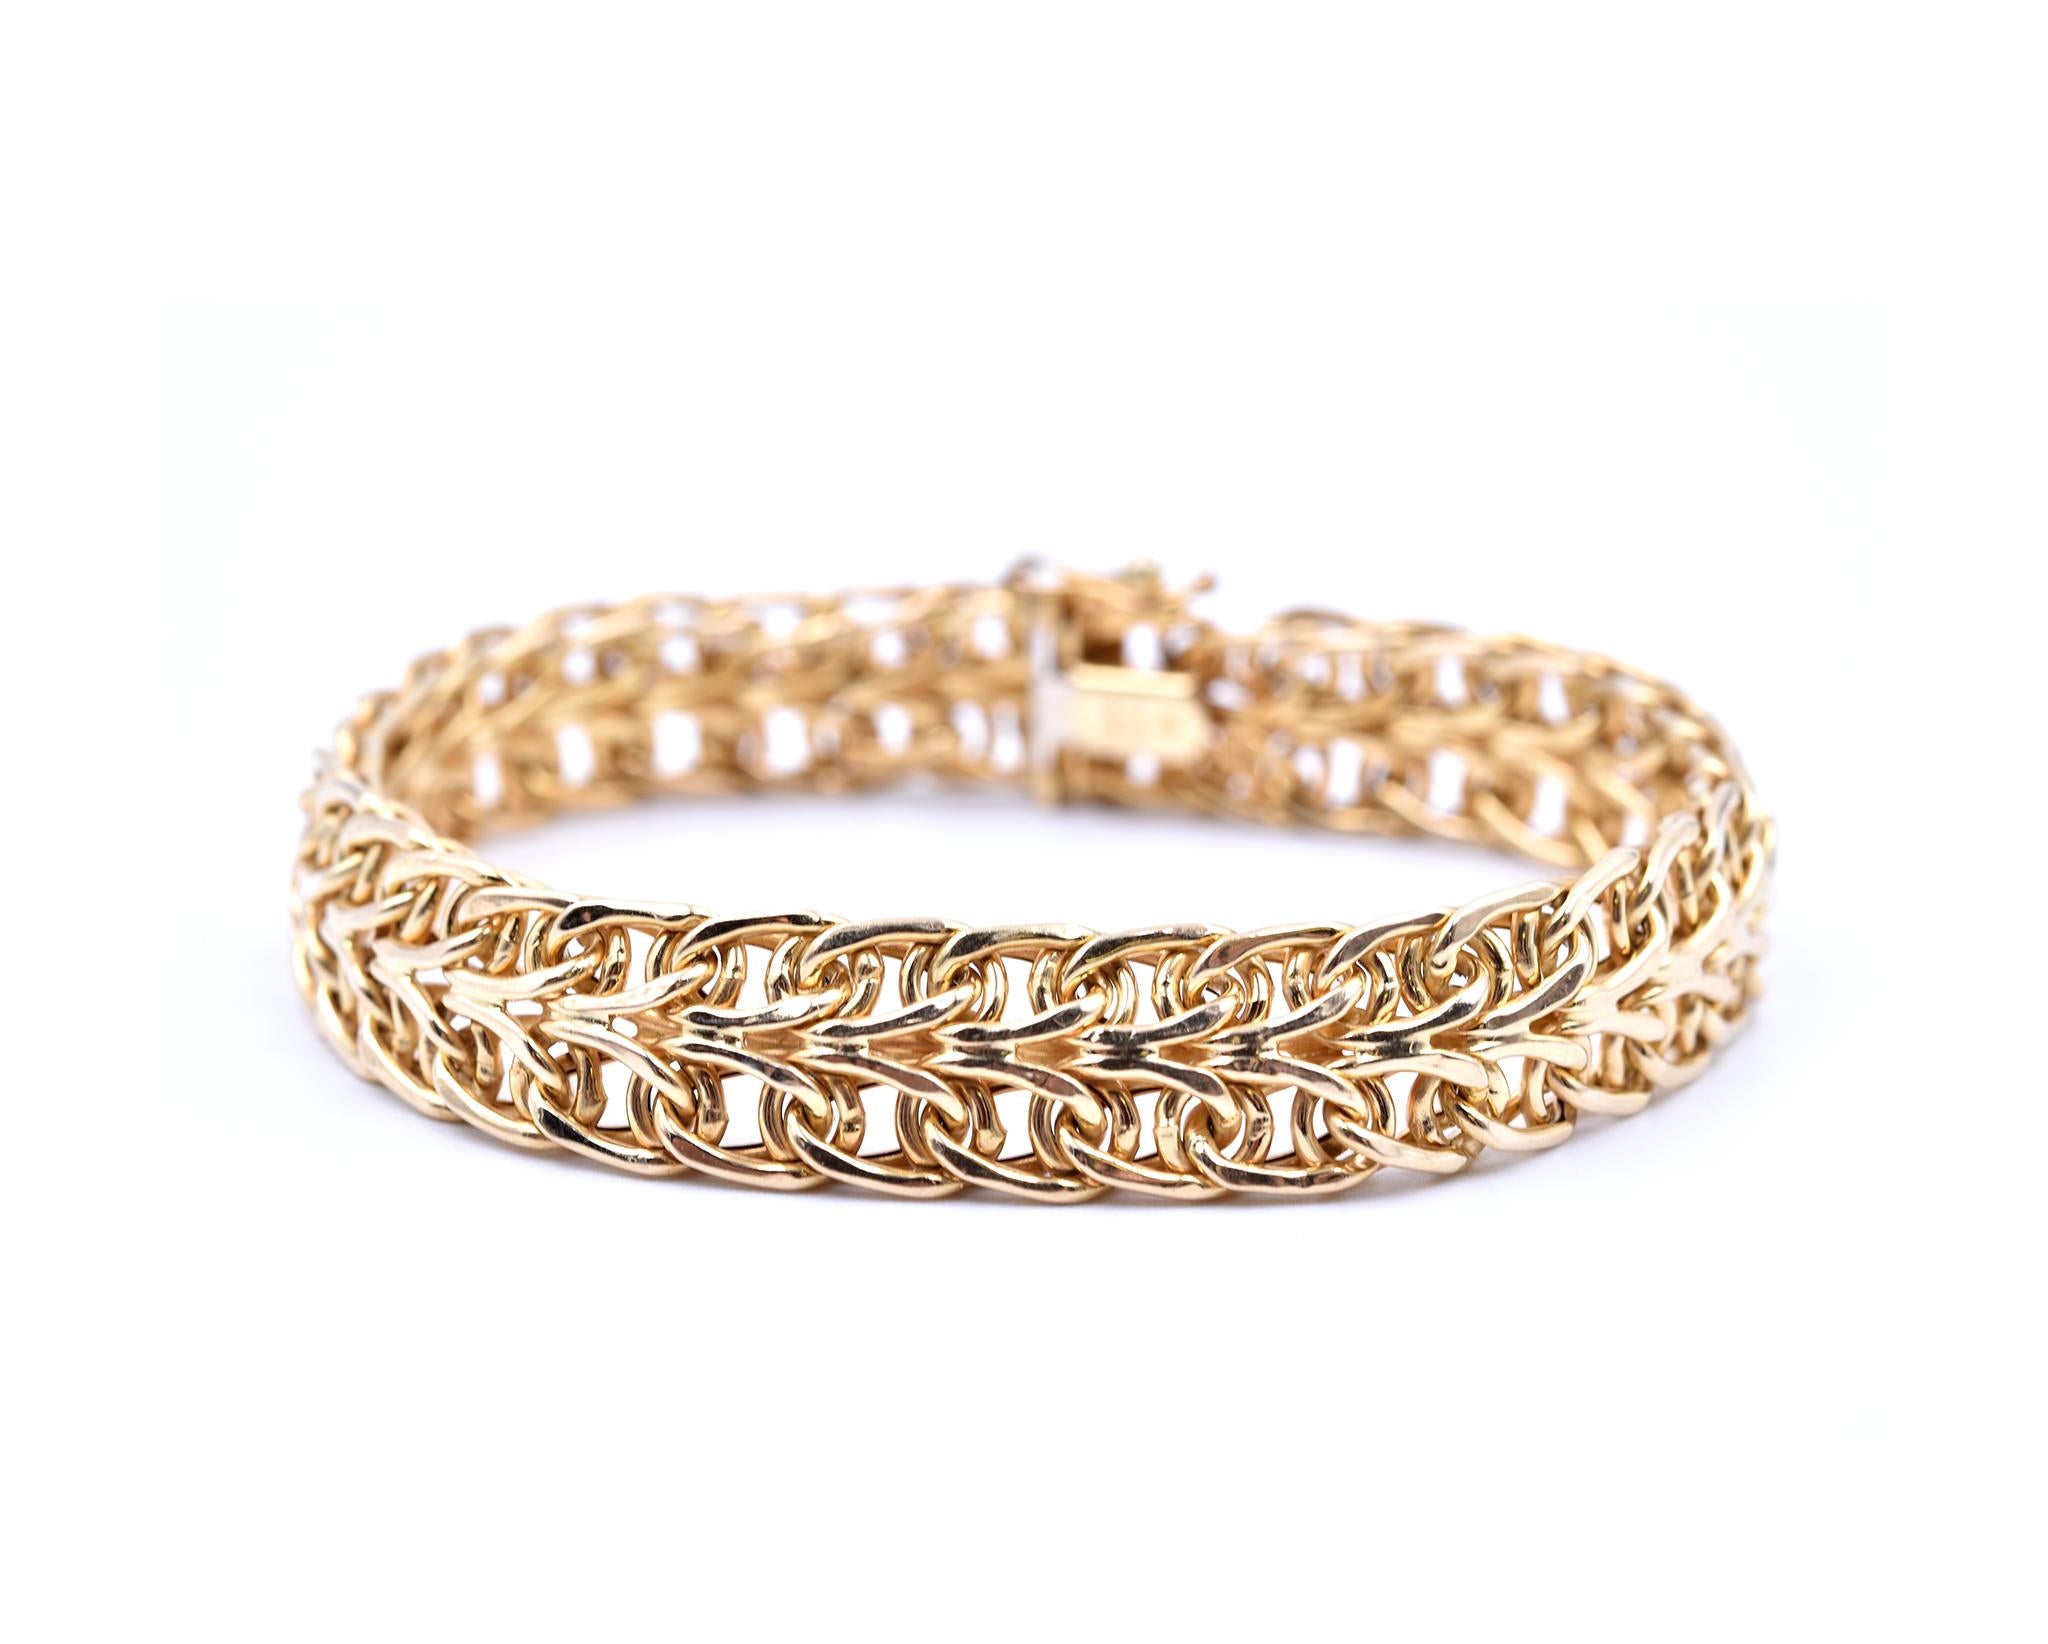 Designer: custom design
Material: 14k yellow gold
Dimensions: bracelet is 7-inch long and 10.40mm wide 
Weight: 9.90 grams
